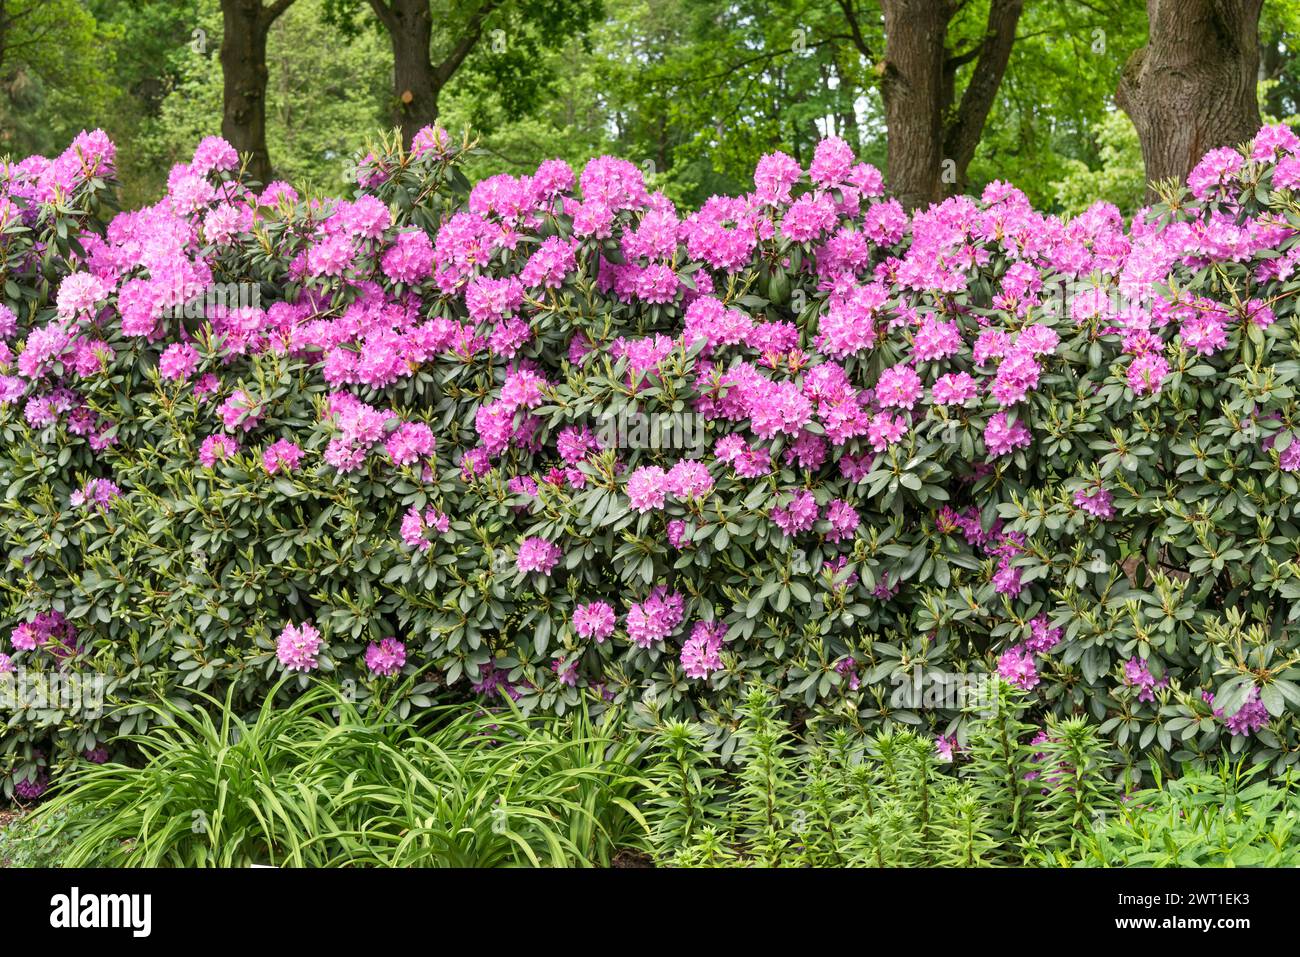 rhododendron (Rhododendron 'Roseum Elegans', Rhododendron Roseum Elegans), blooming, cultivar Roseum Elegans Stock Photo